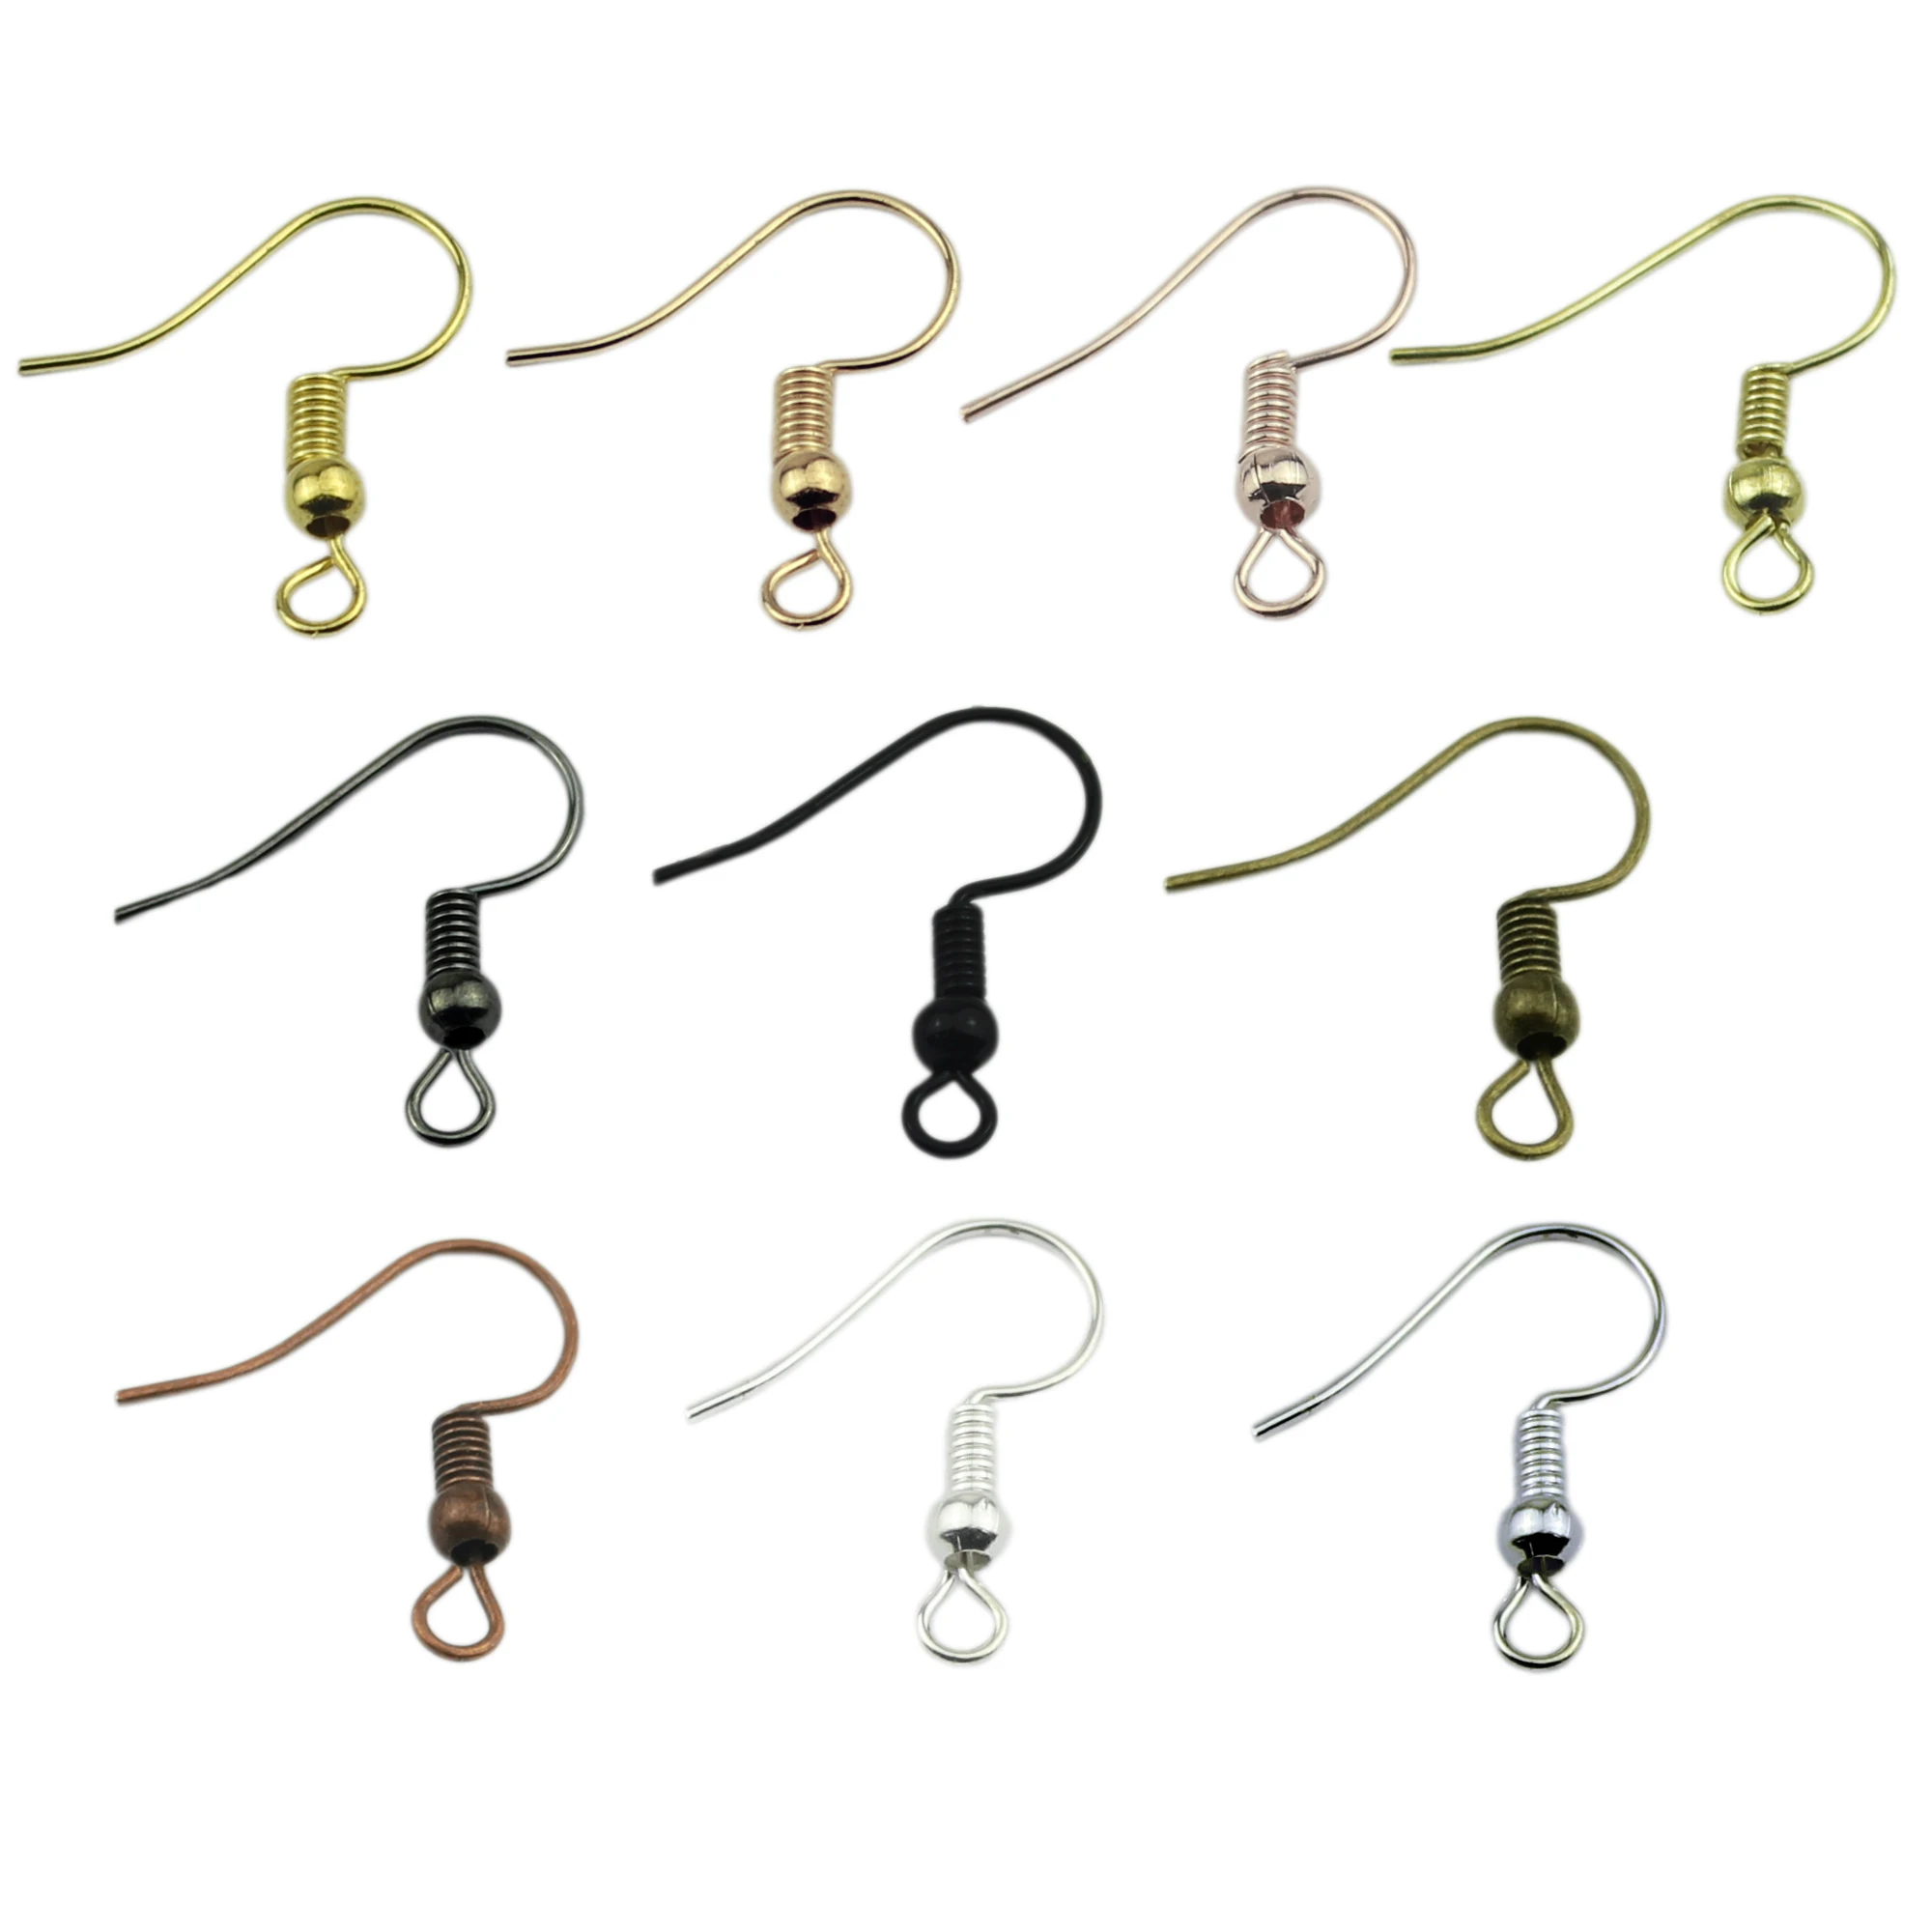 100pcs/lot stainless steel Earring Hook Ear Hook Clasp With Bead Charms